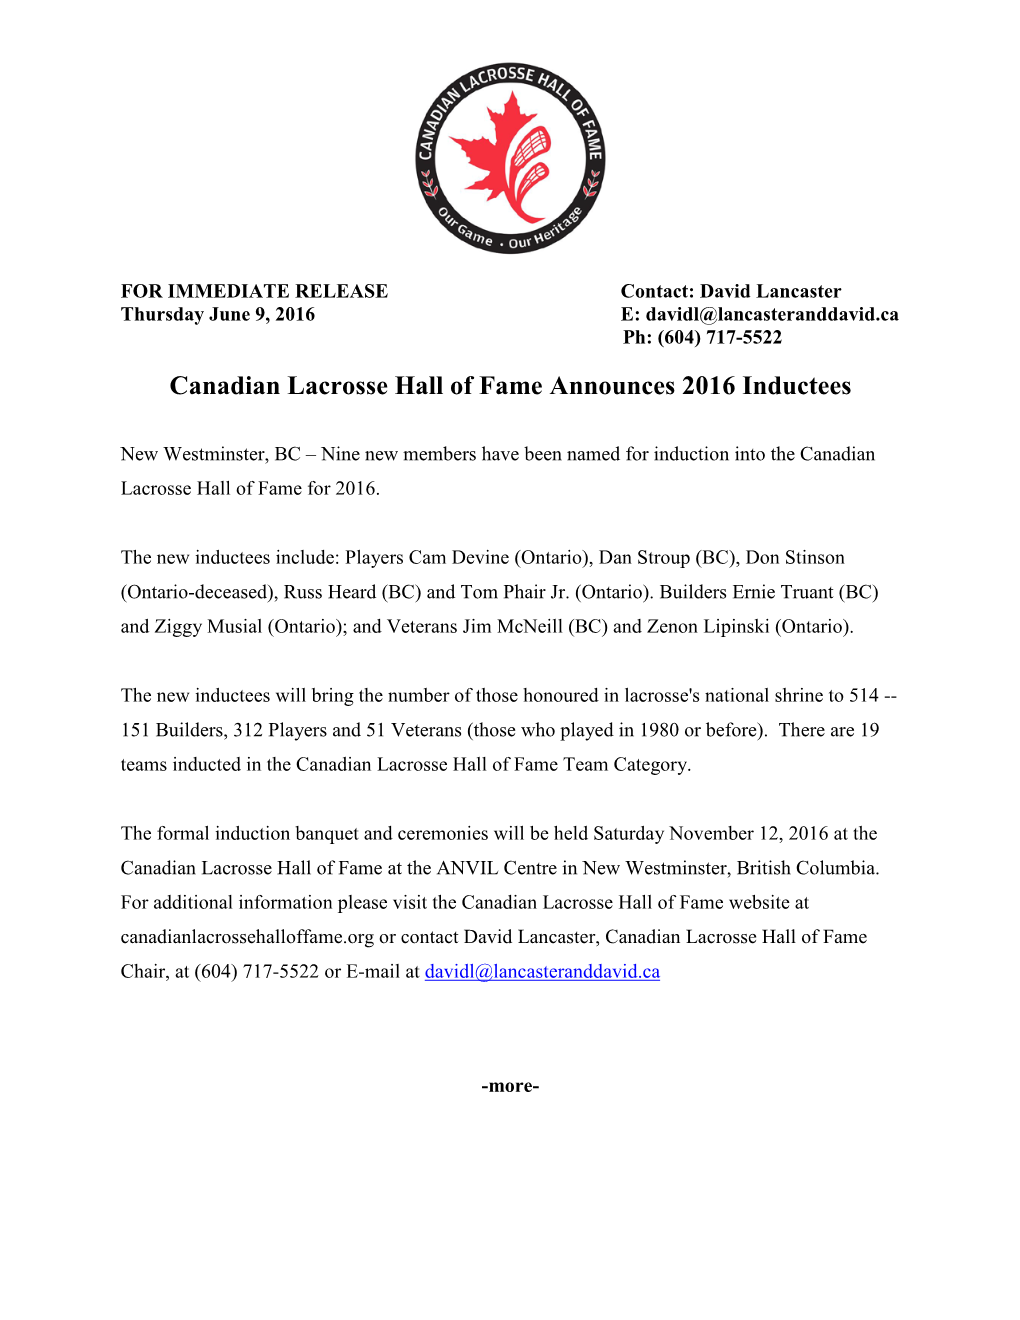 Canadian Lacrosse Hall of Fame Annnounces 2016 Inductees